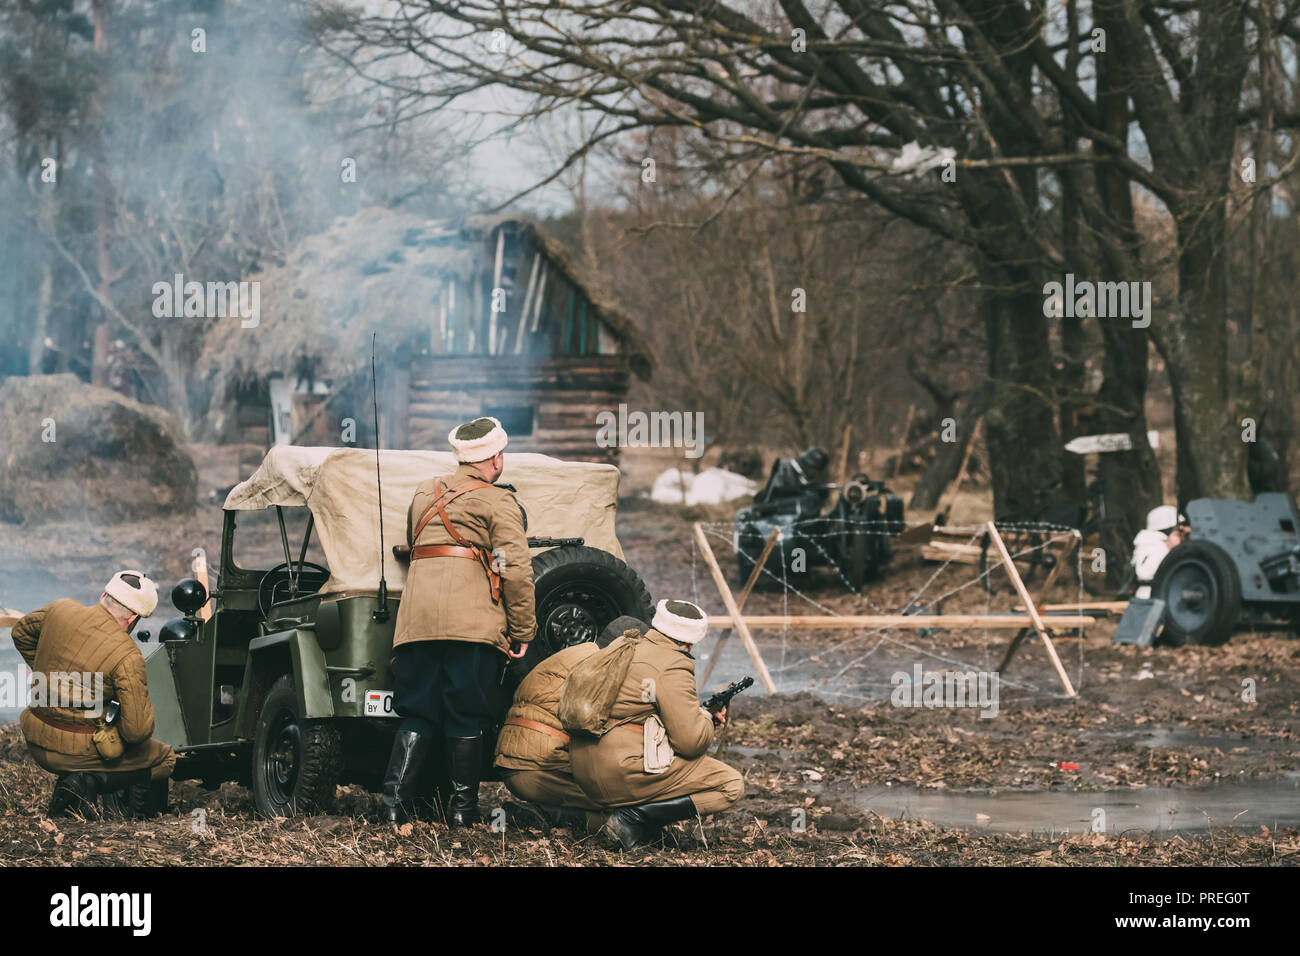 Group Of Reenactors Dressed As Russian Soviet Red Army Soldiers Of World War II Go On Offensive Under Cover Of Soviet Scout Car. Historical Reenactmen Stock Photo